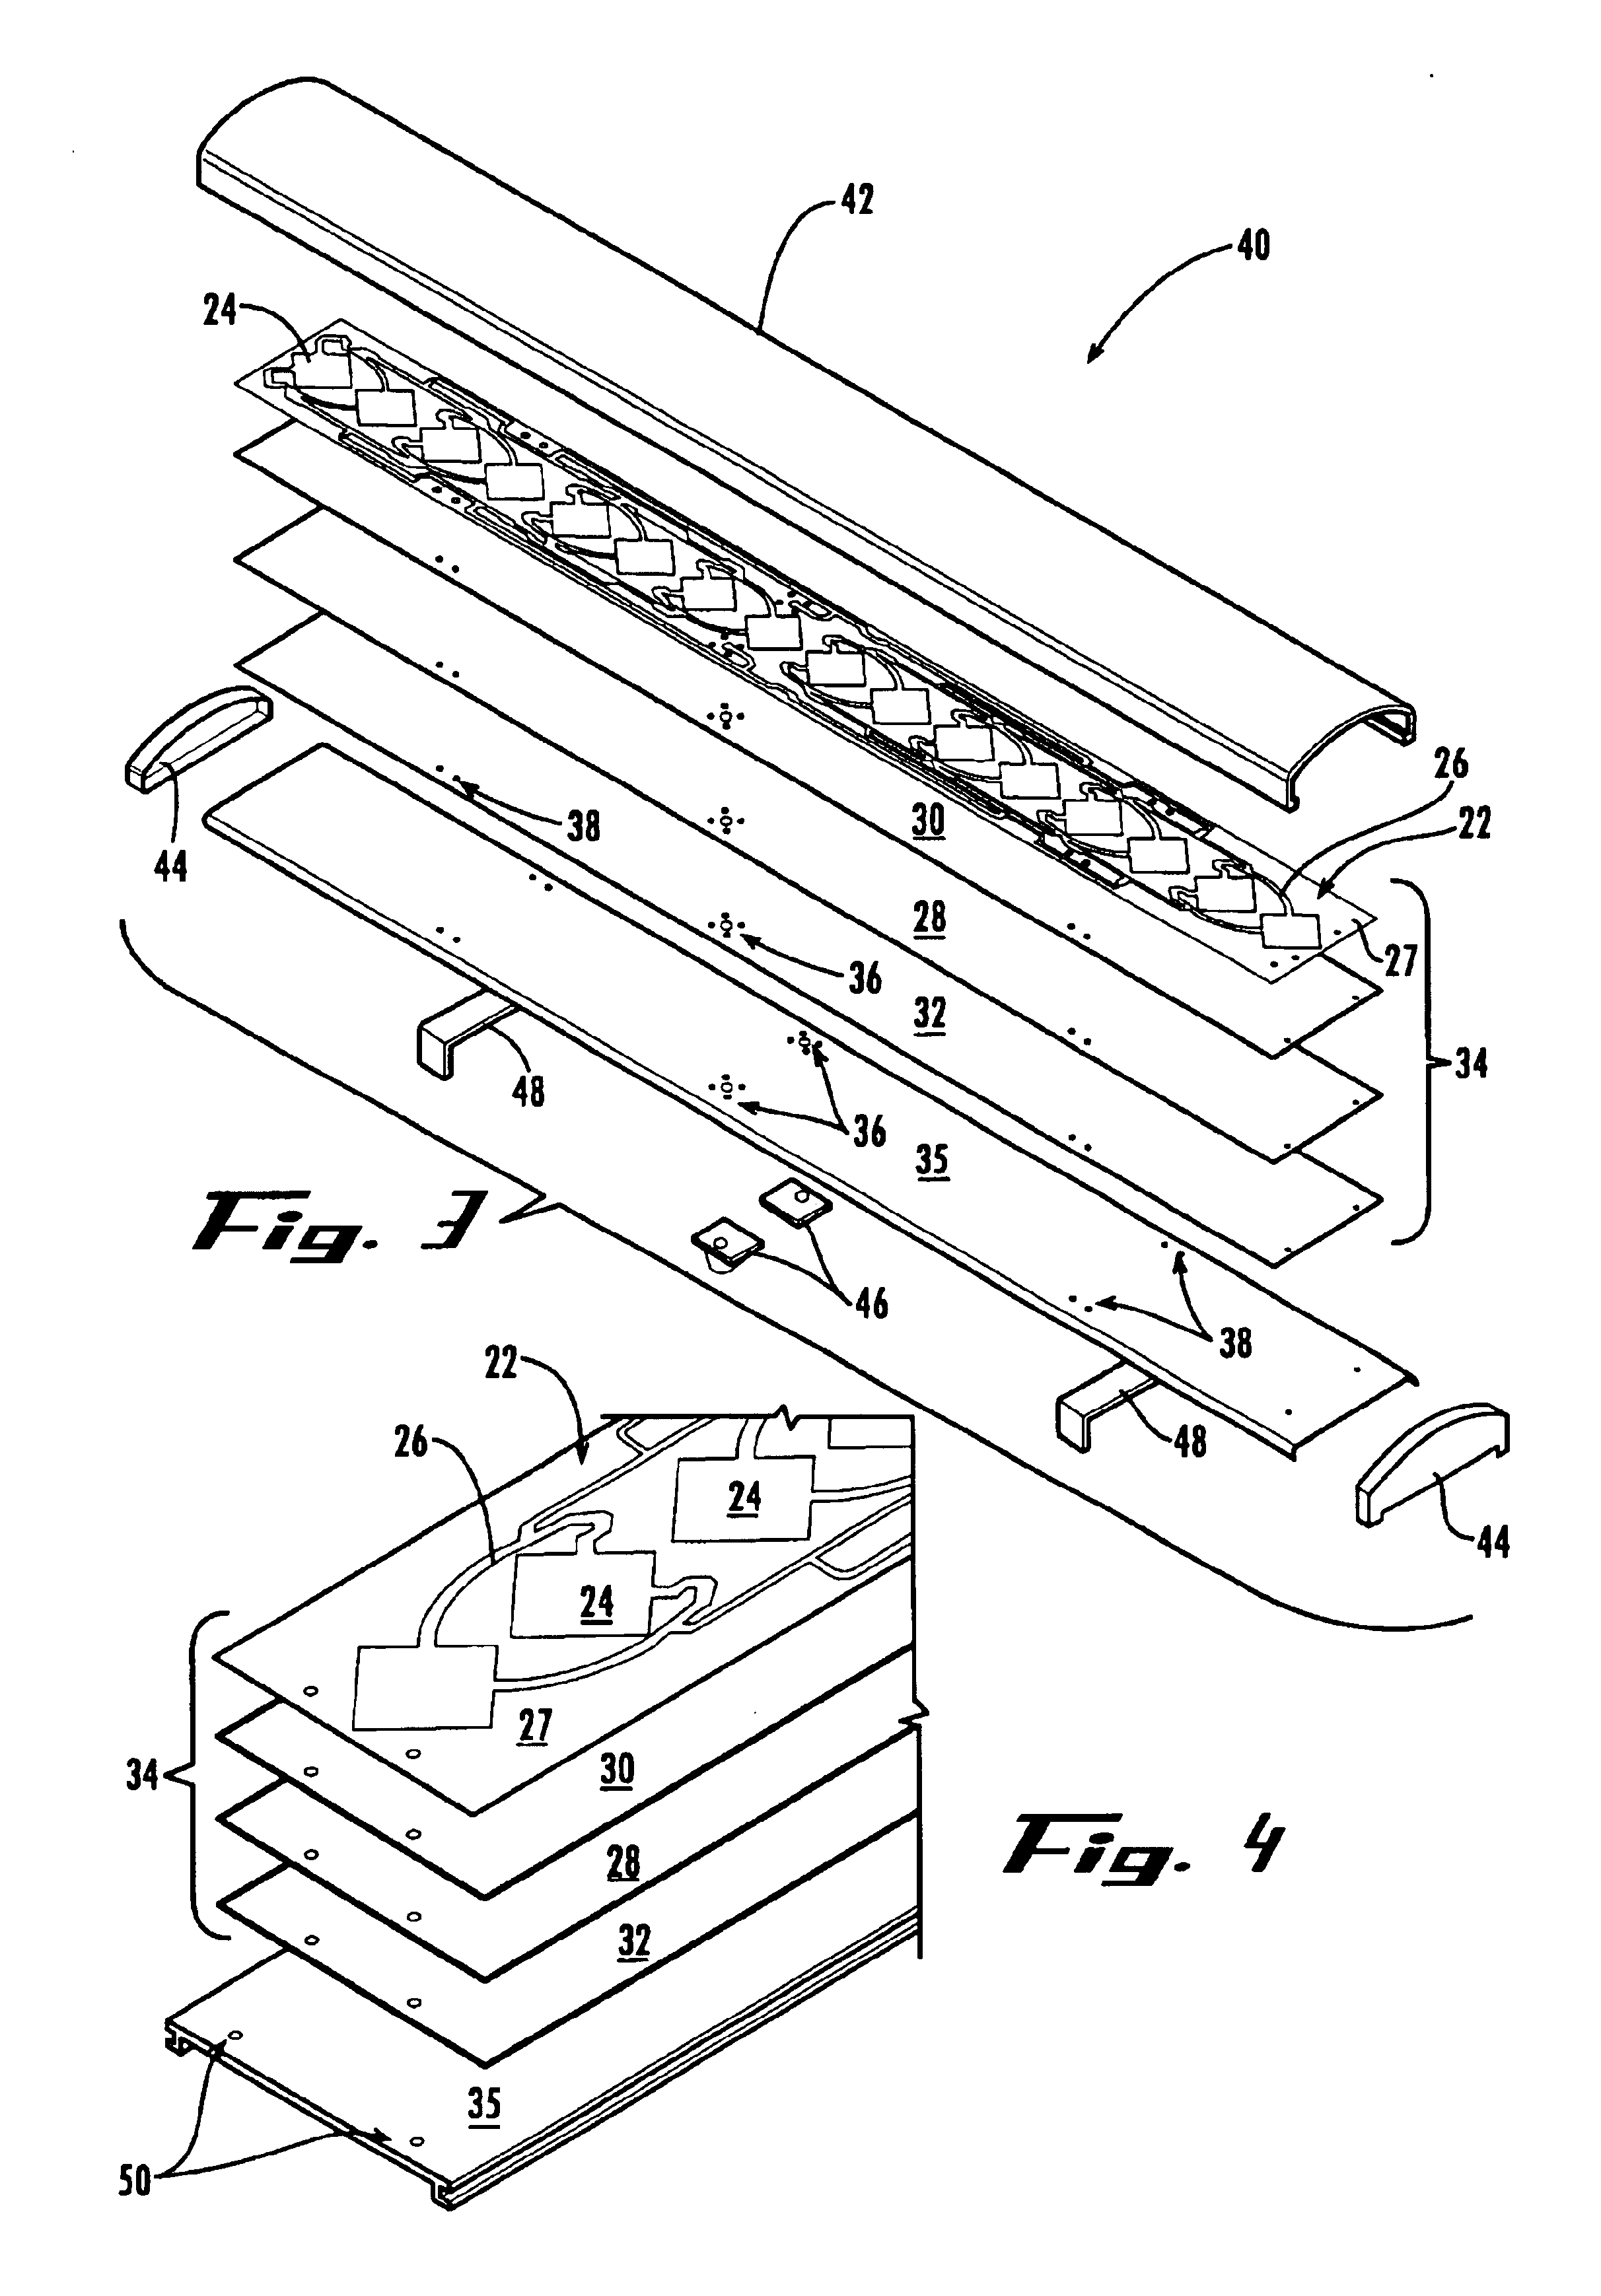 Conformable layered antenna array